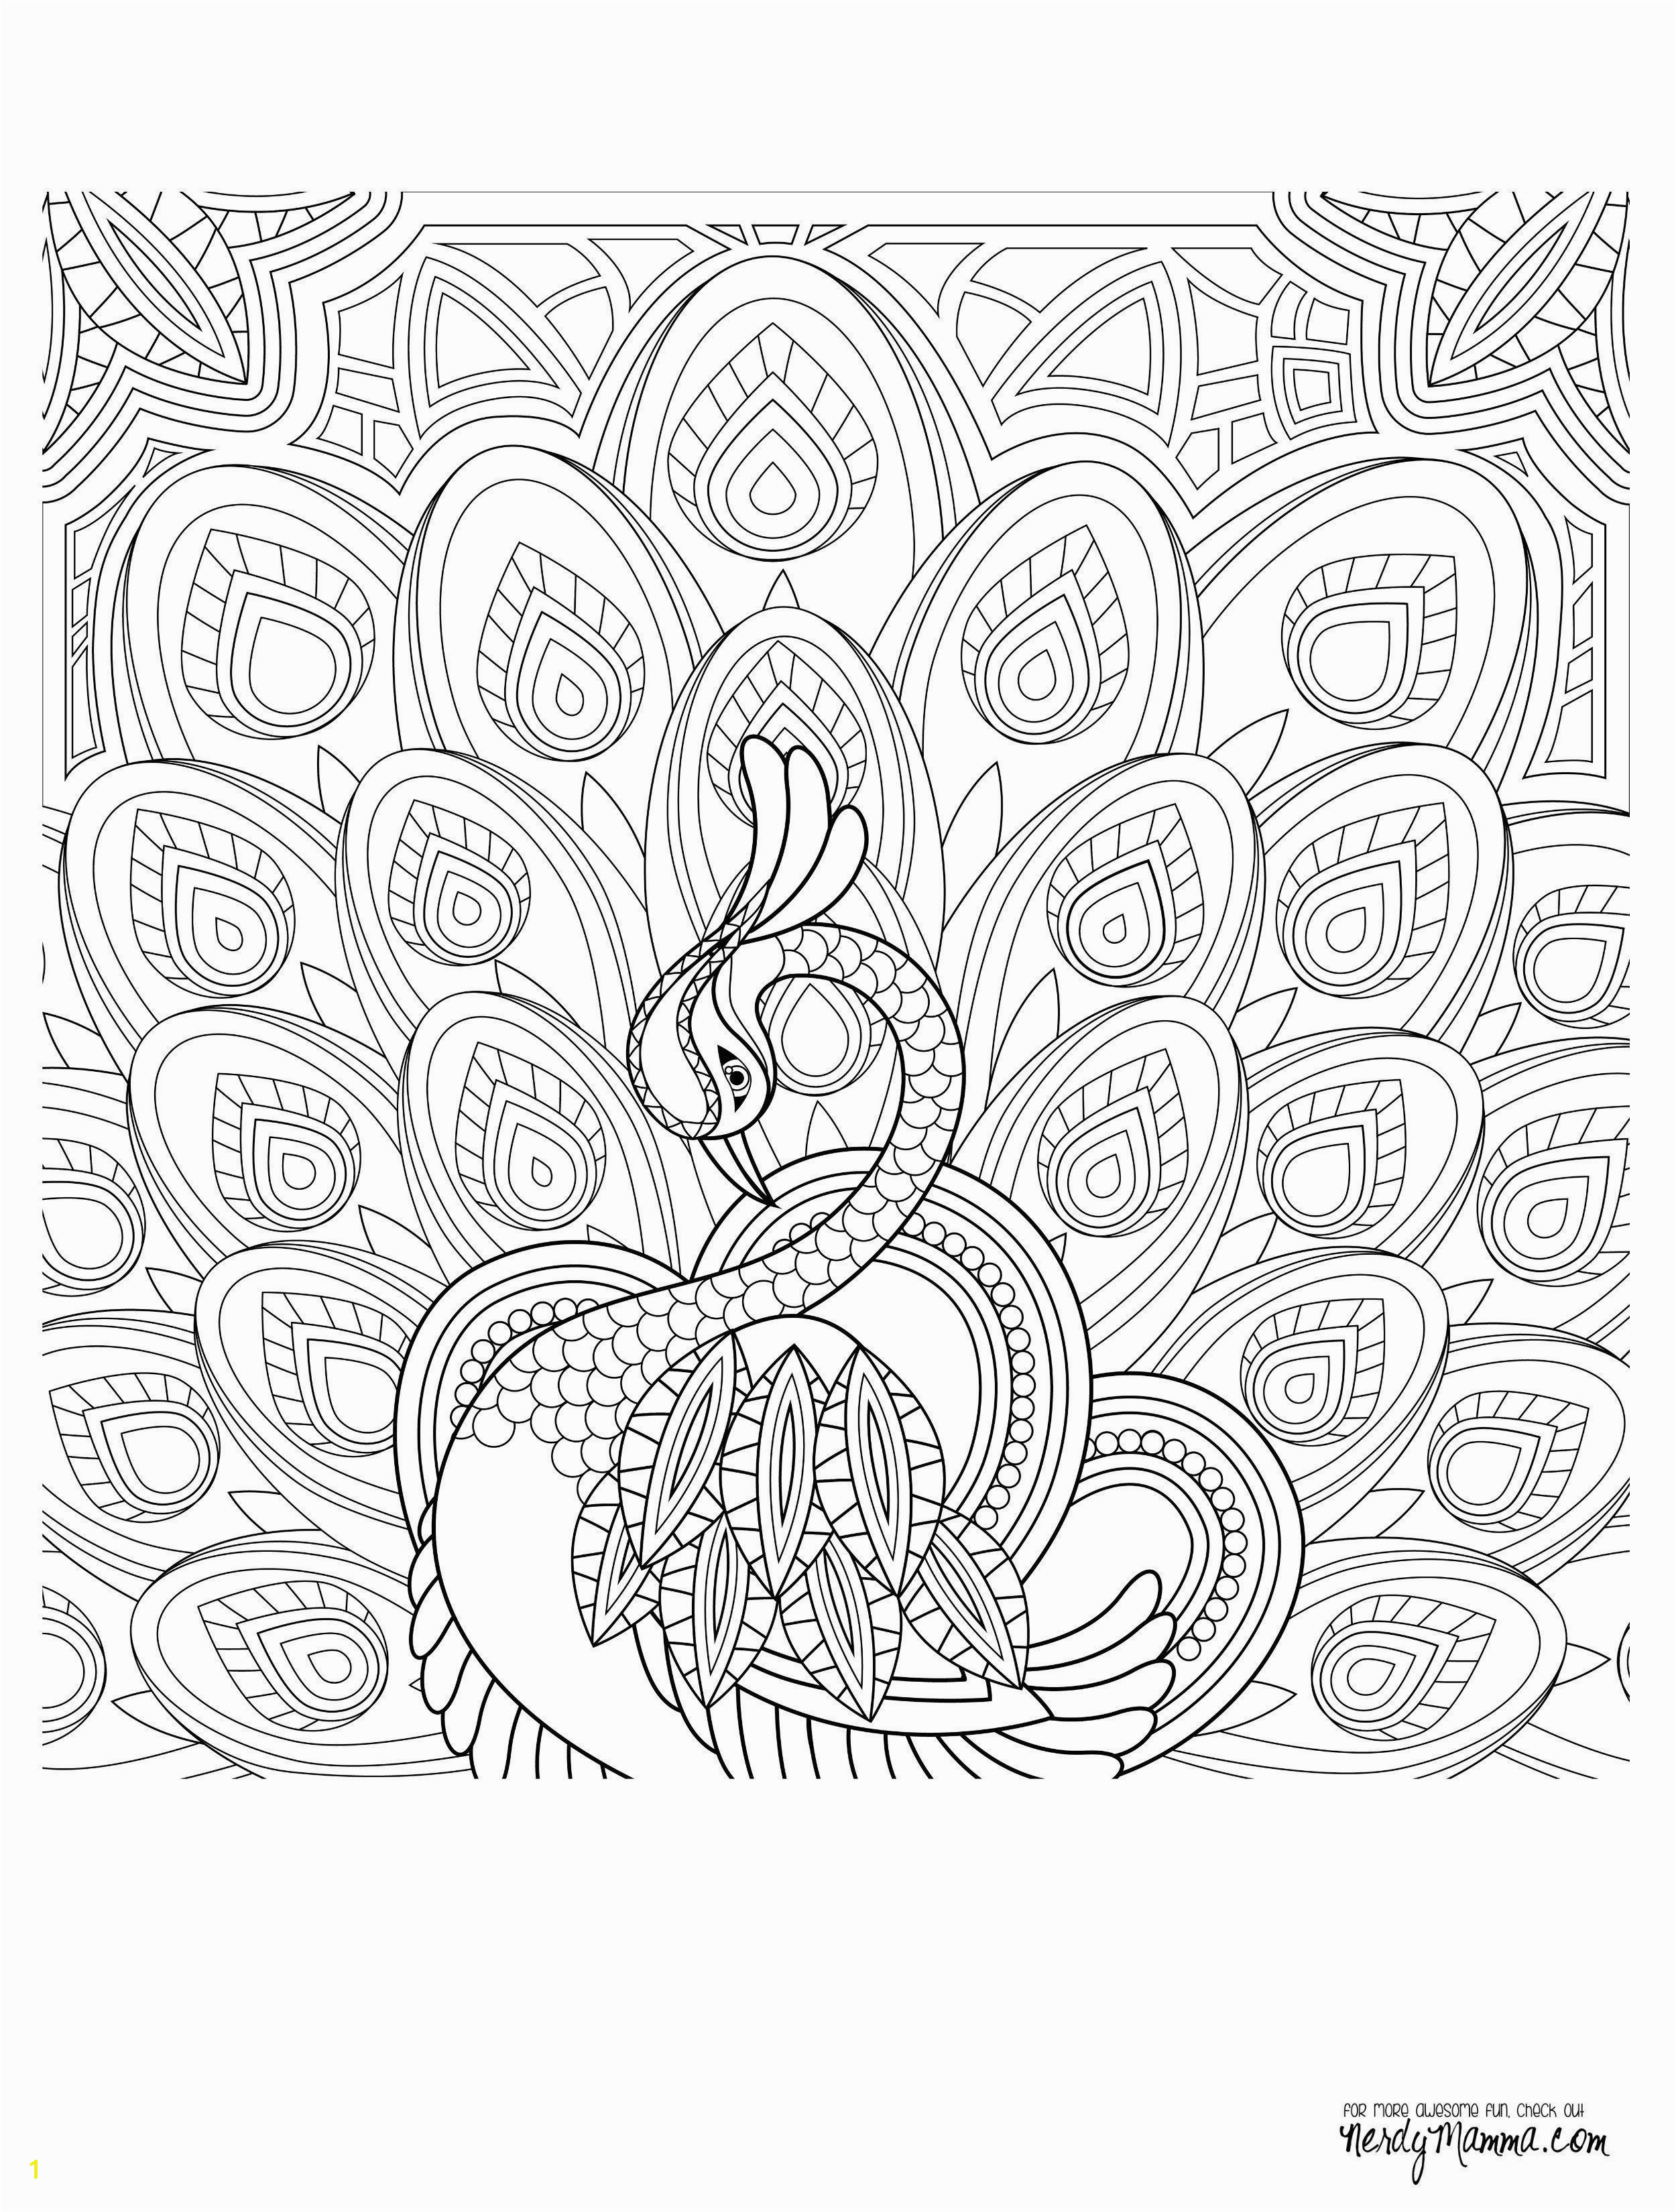 Medium Level Coloring Pages Wunderbar Mal Coloring Pages Fresh Crayola Pages 0d